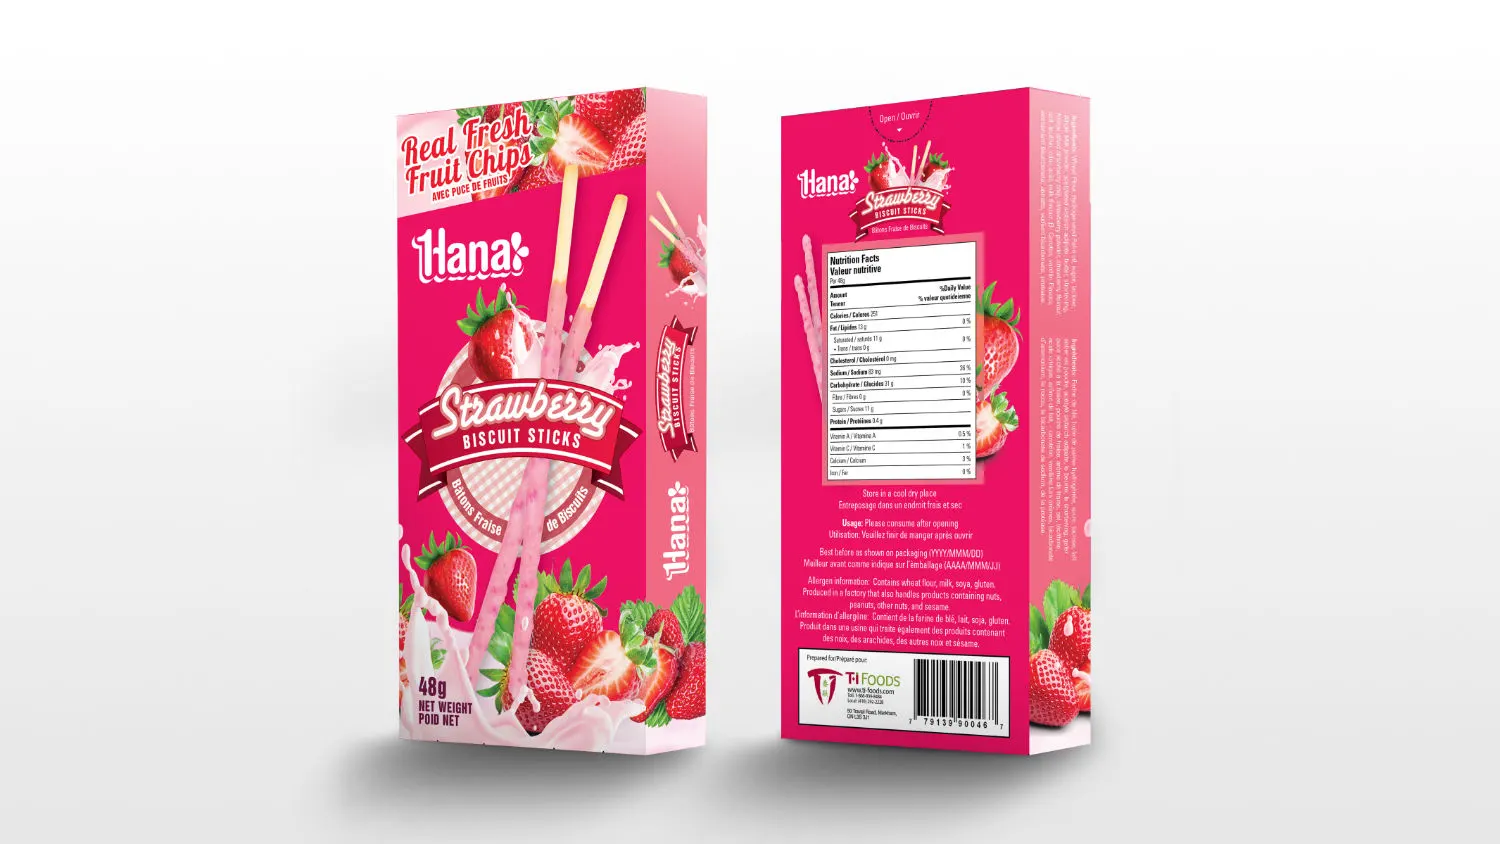 Graphic design project for TI Foods 泰聯貿易. Designed product shootings